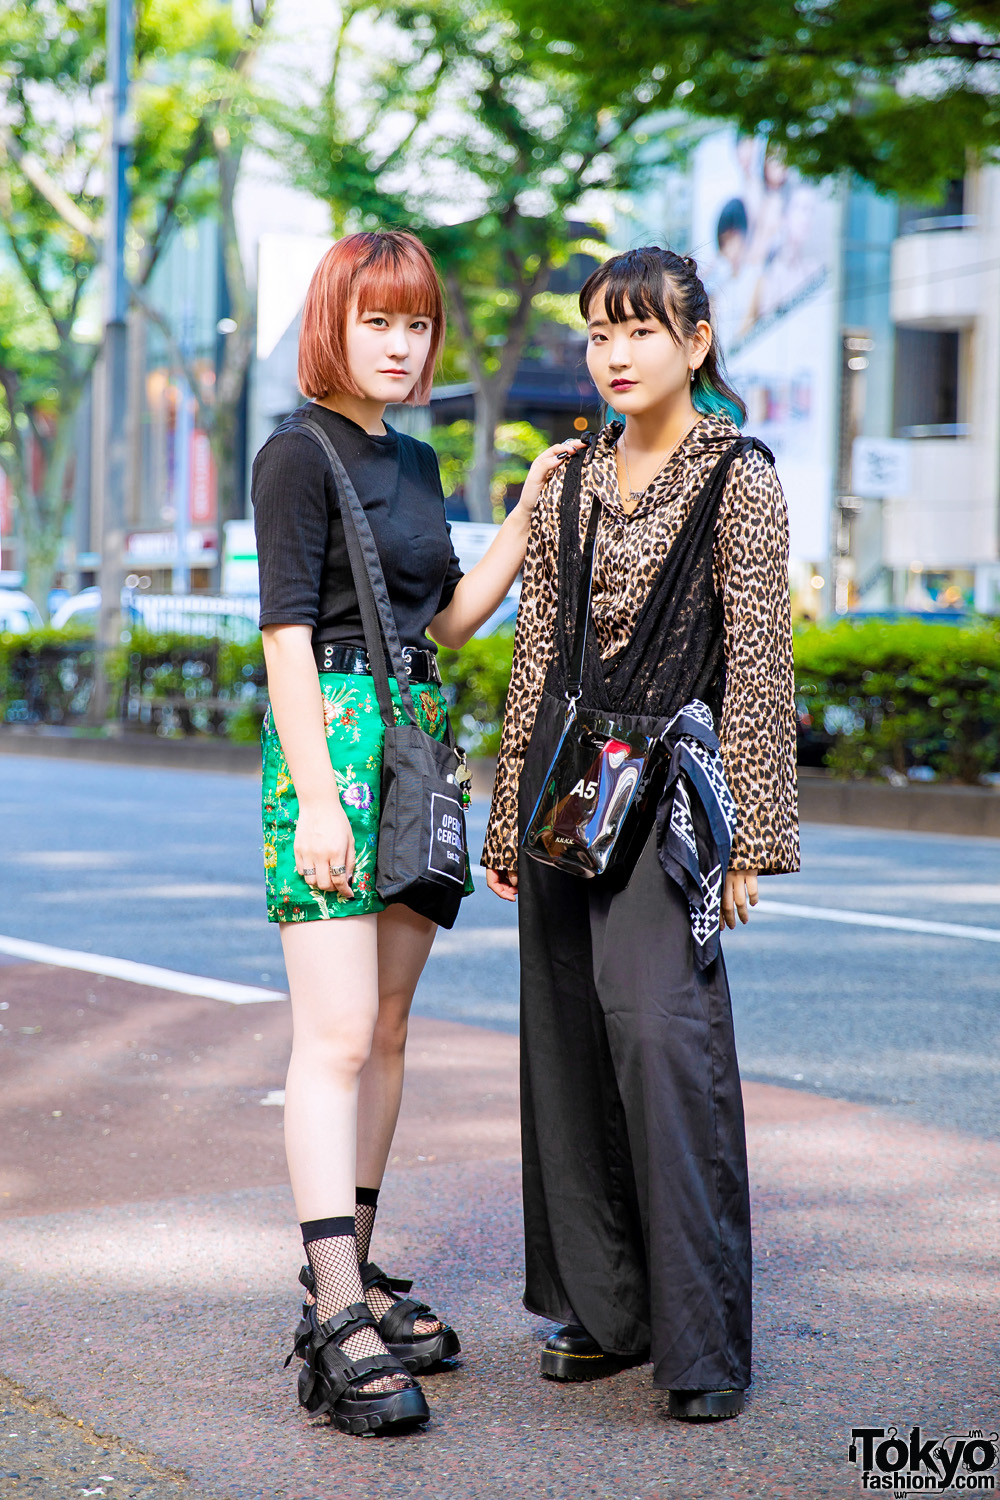 Leopard Print Top & Floral Silk Skirt Harajuku Street Styles w/ Bubbles, NaNa-NaNa, Oh Pearl, Never Mind the XU, GU, Opening Ceremony, Open The Door & Vivienne Westwood